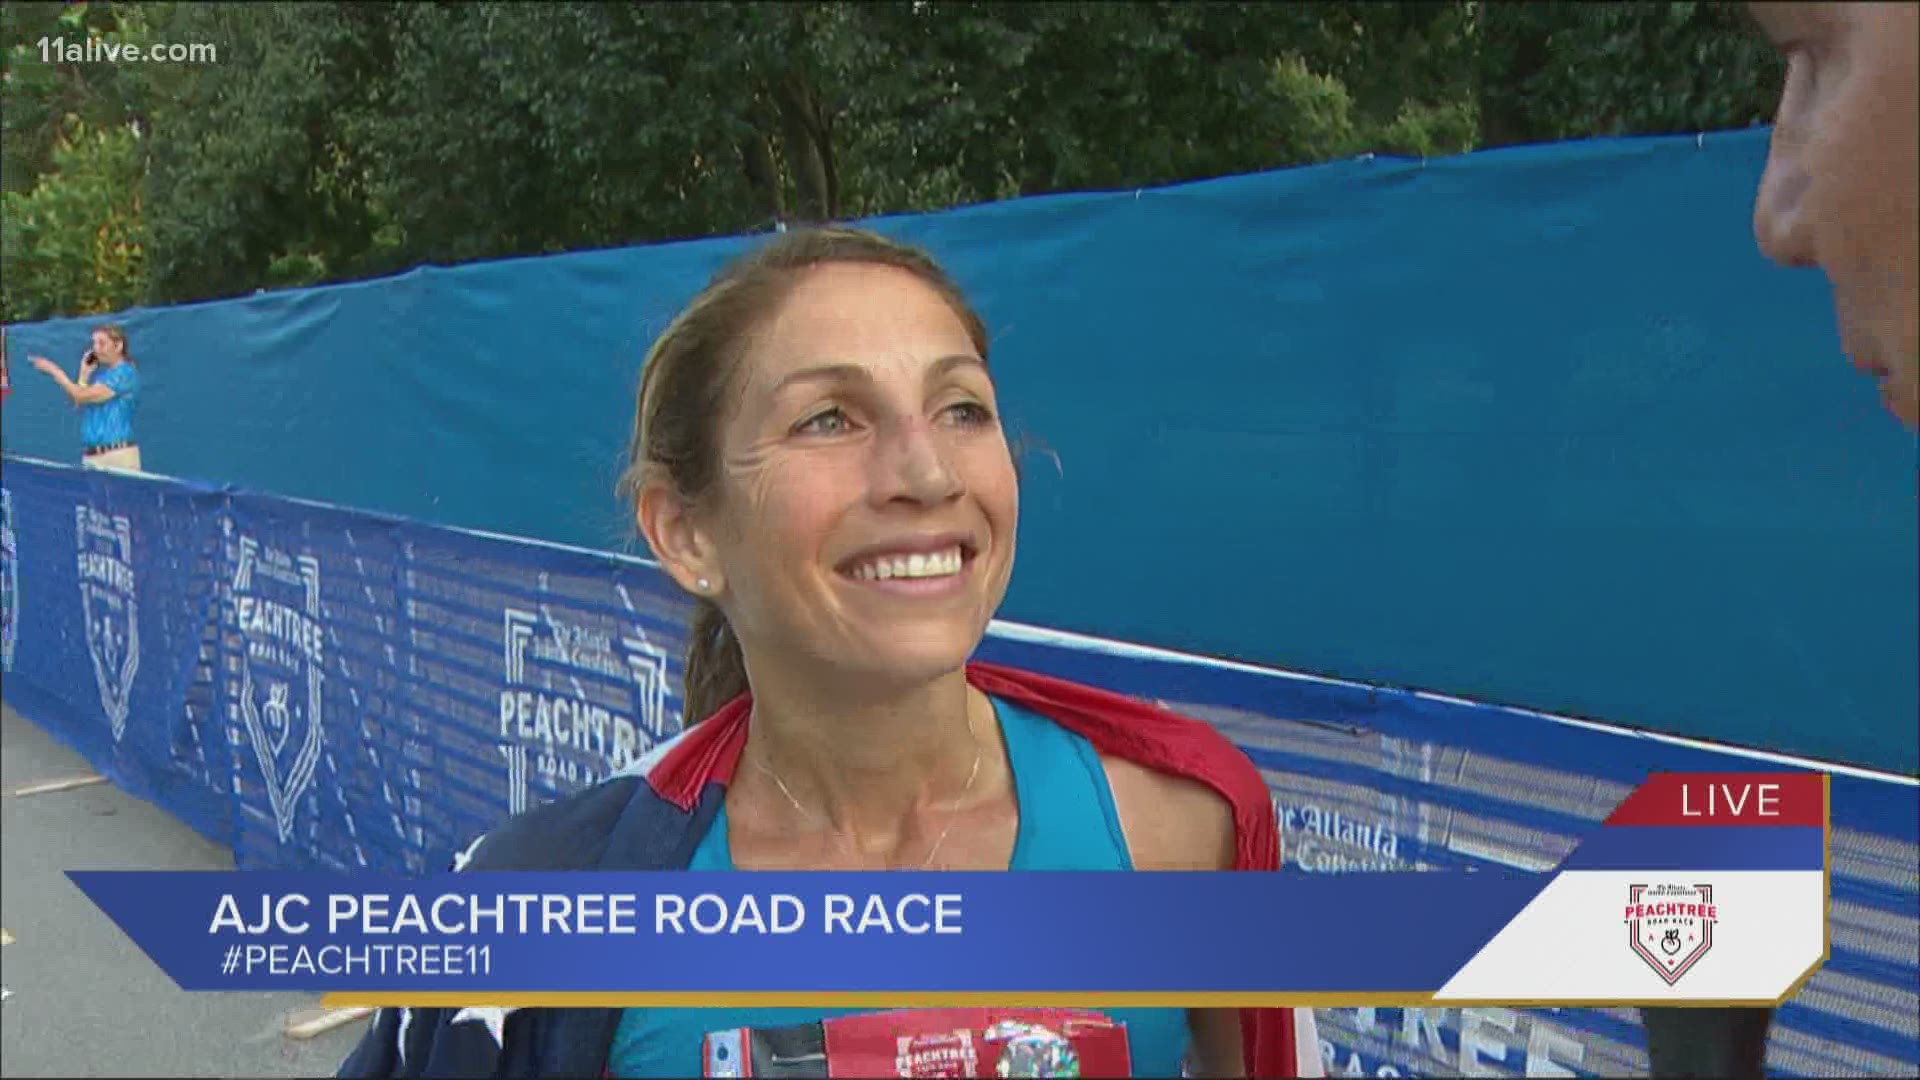 Sara Hall, a perennial American distance running champion, broke away at the end to win the AJC Peachtree Road Race women's race on Sunday.